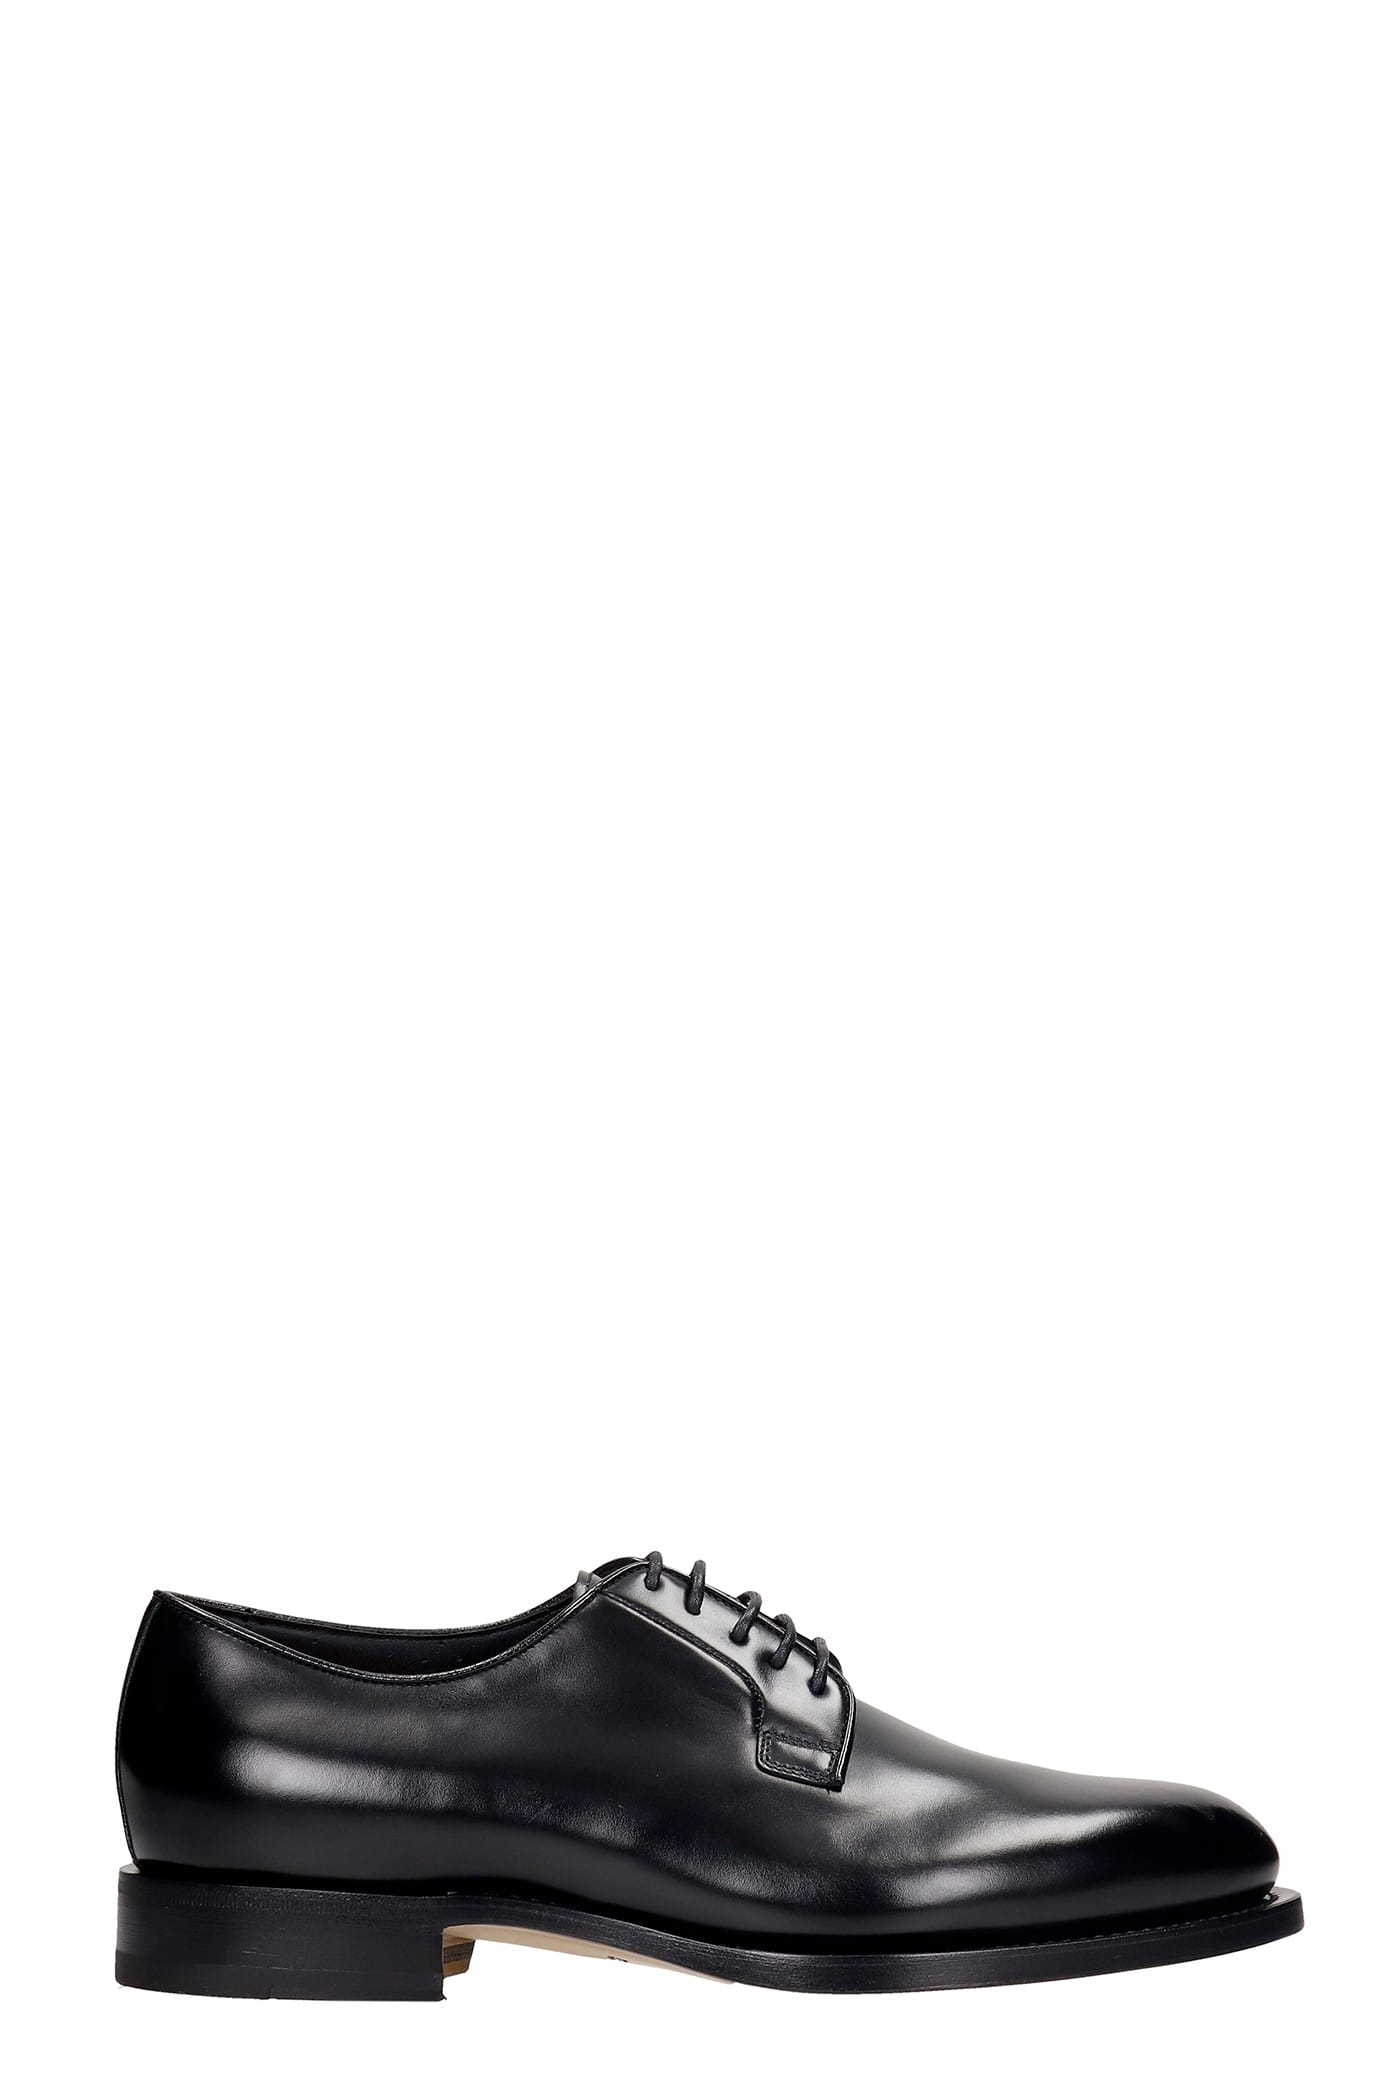 Santoni Lace Up Shoes In Black Leather